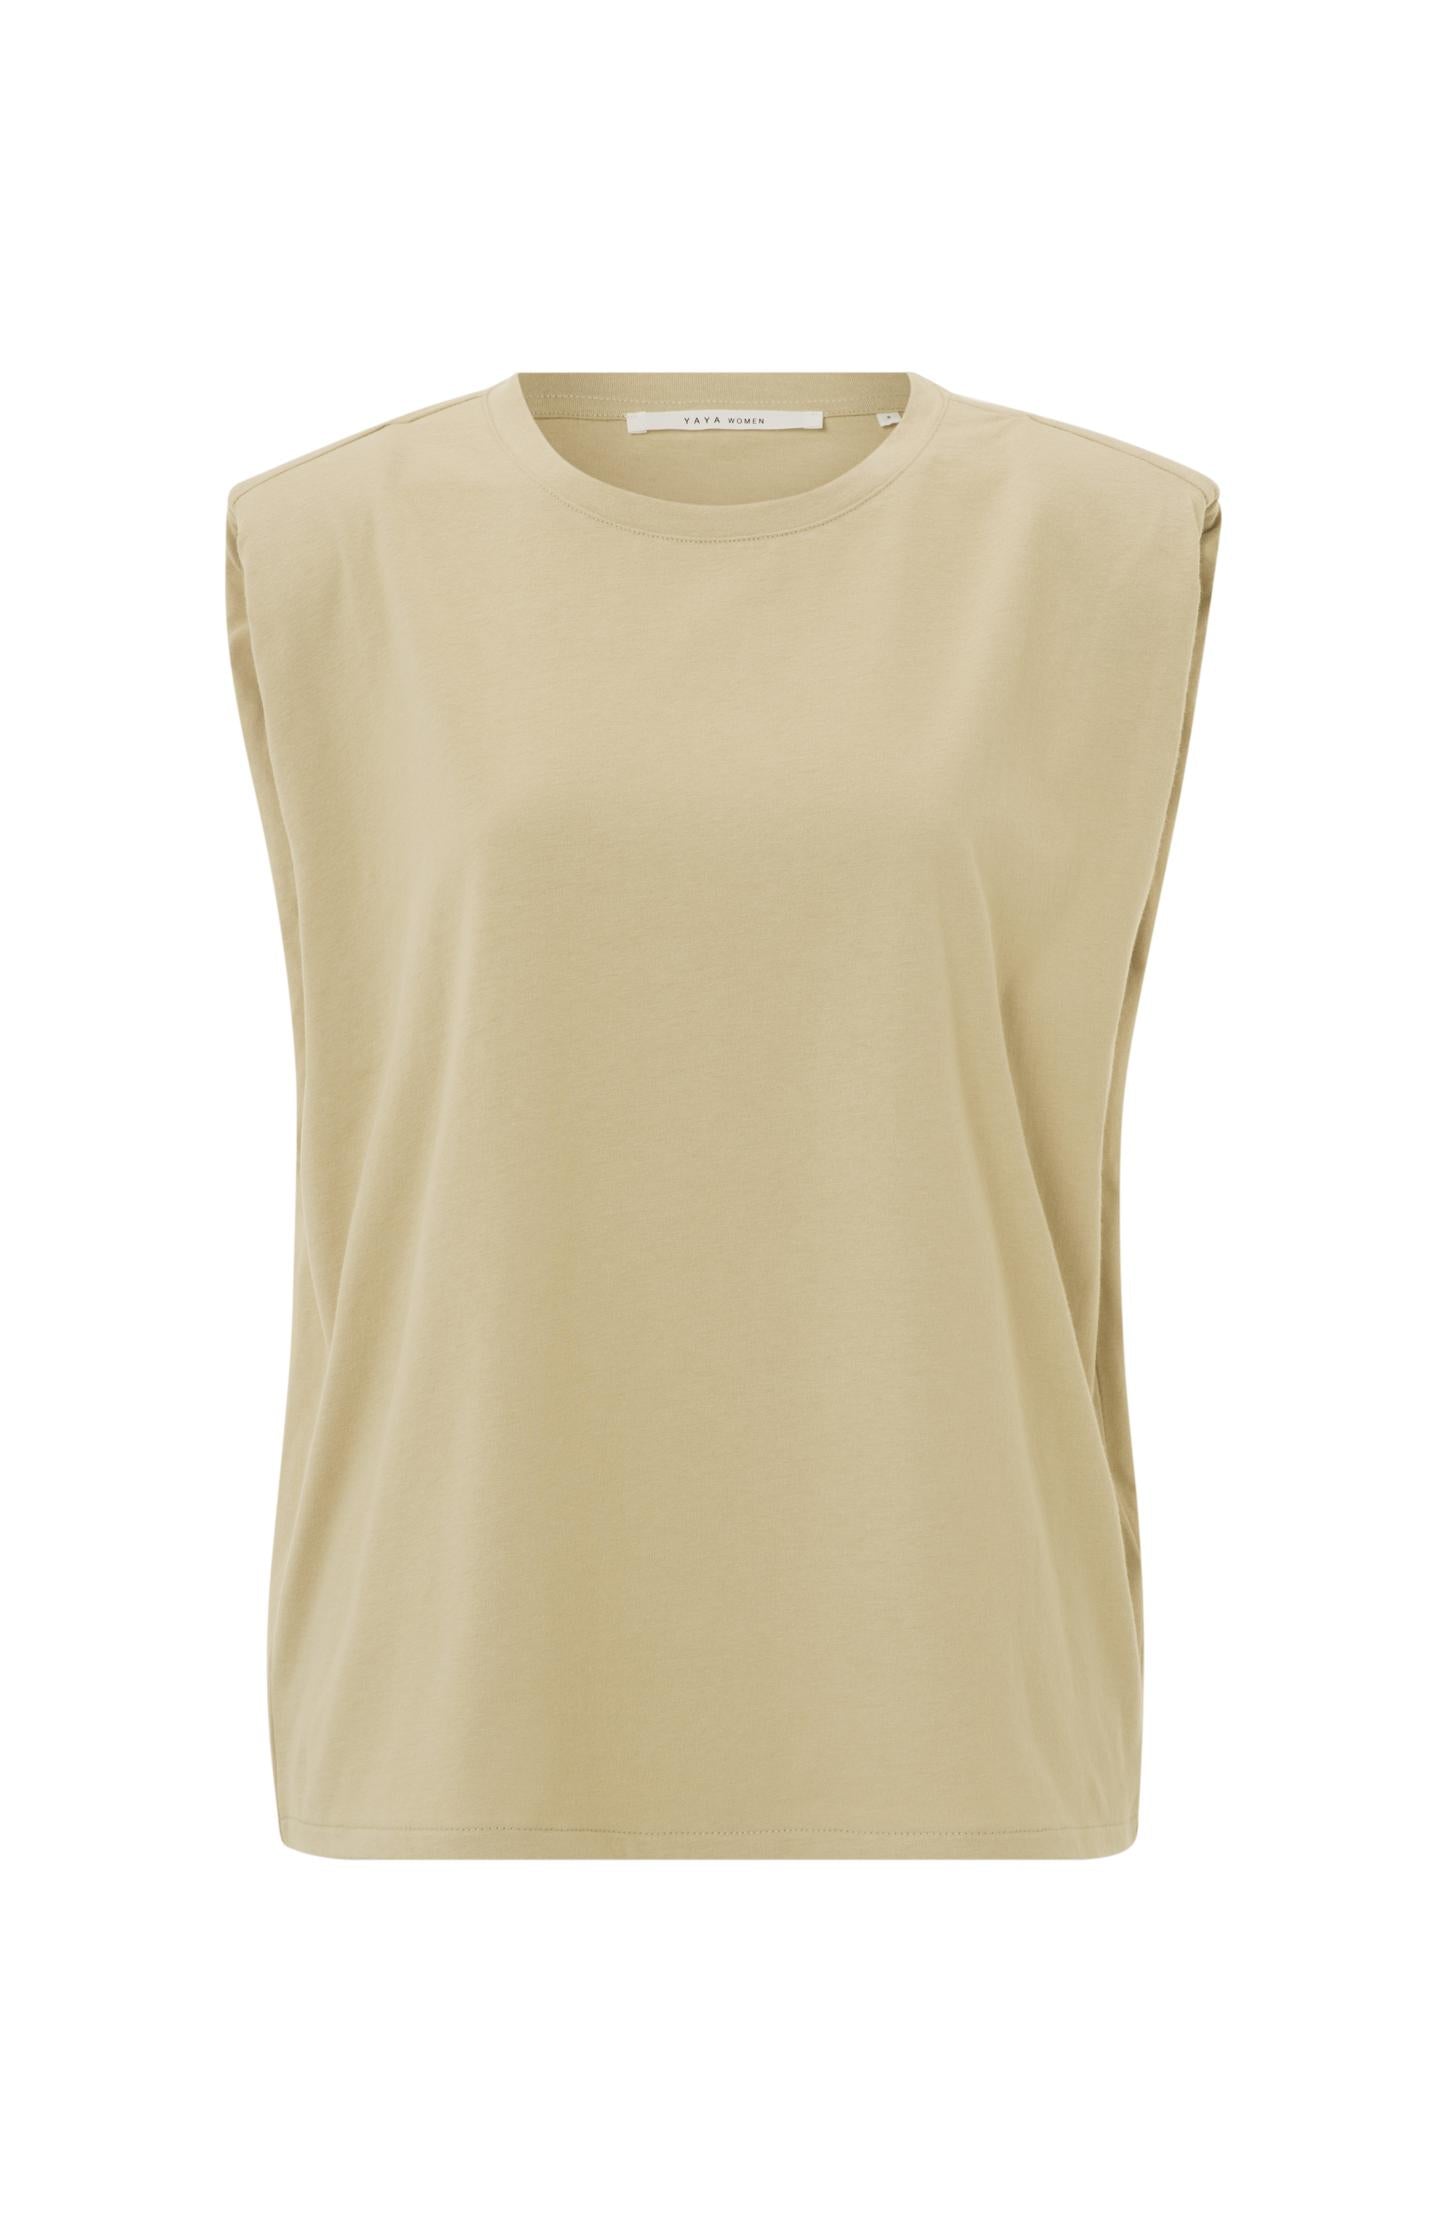 Sleeveless T-shirt with round neck and shoulderpadding - Type: product